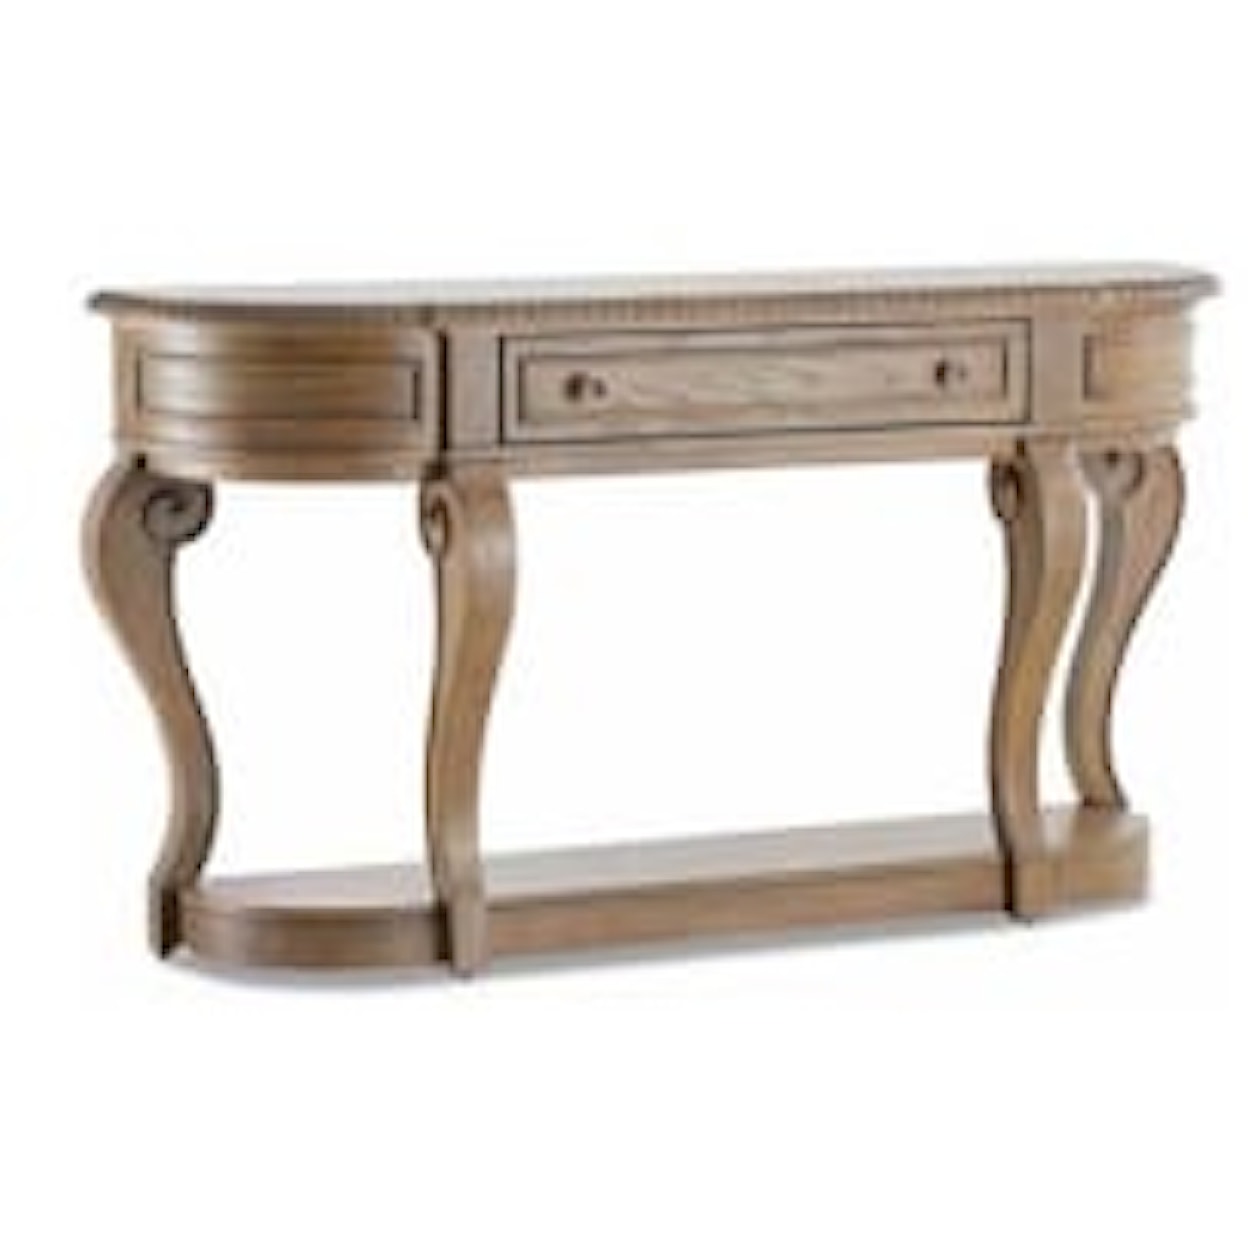 Trisha Yearwood Home Collection by Legacy Classic Jasper County Table